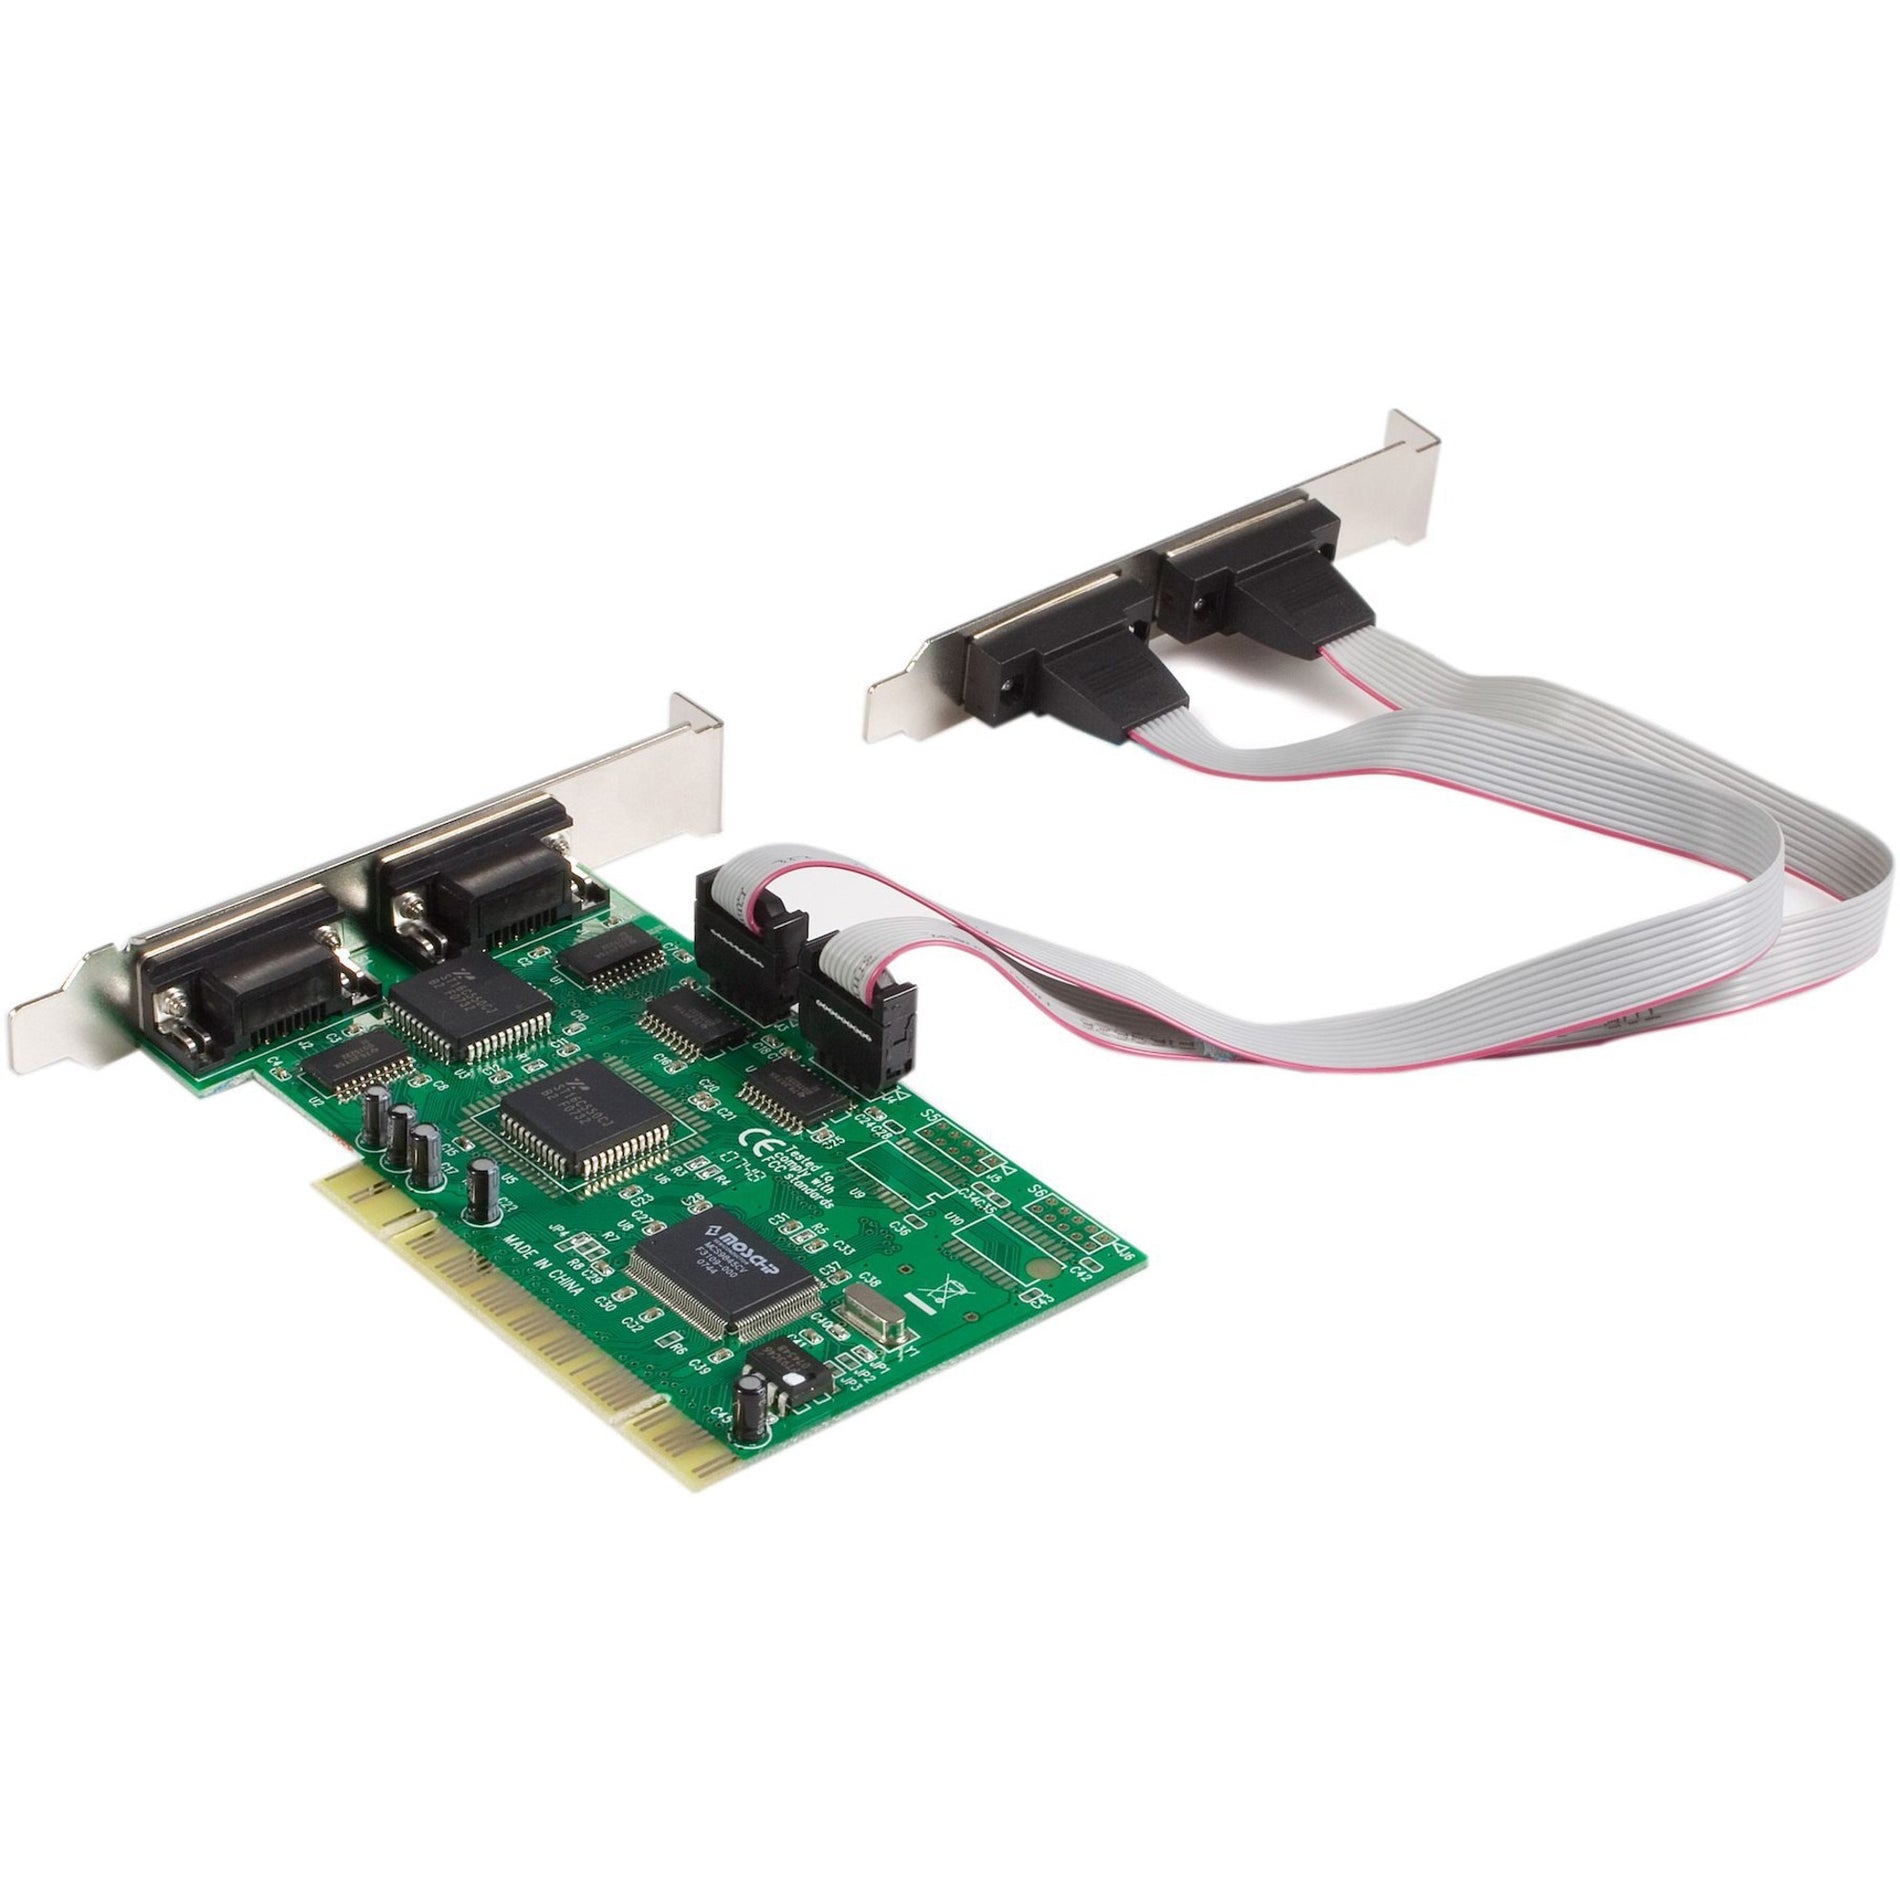 StarTech.com PCI4S550N 4 Port PCI RS232 Serial Adapter Card with 16550 UART, Plug and Play, Windows & Linux Compatible